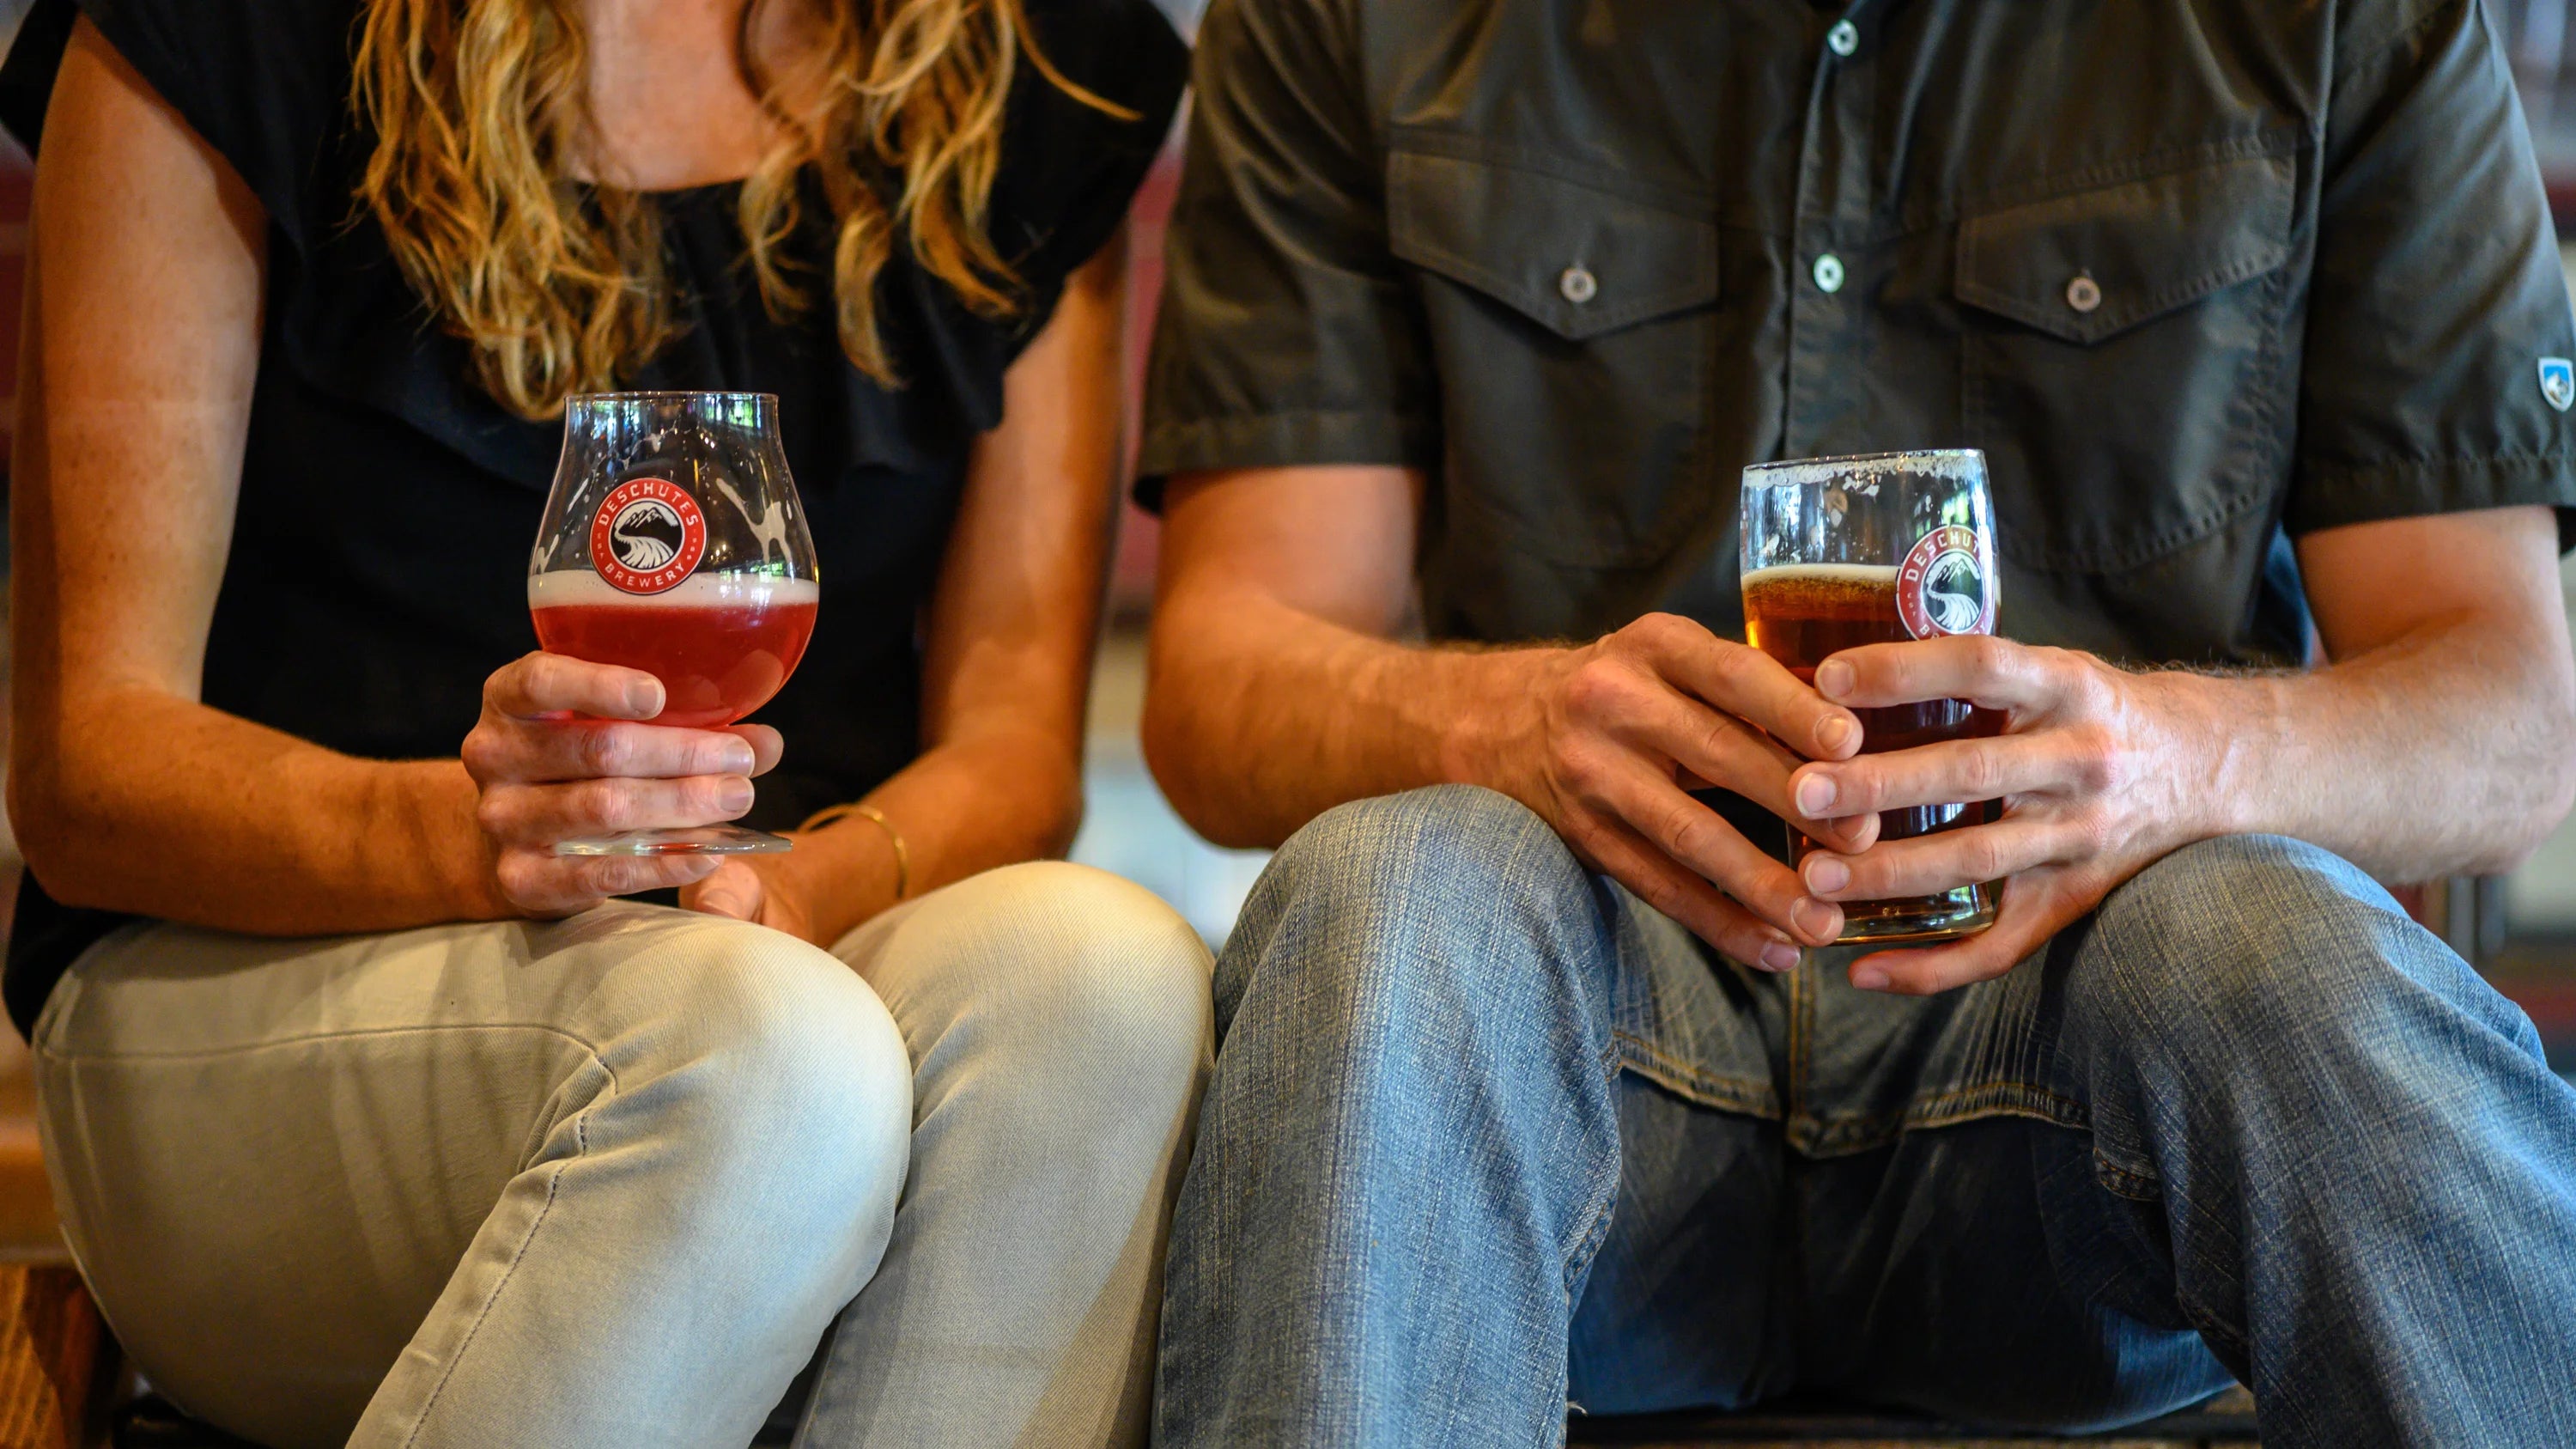 A closeup of two friends holding beers in Deschutes branded glassware.